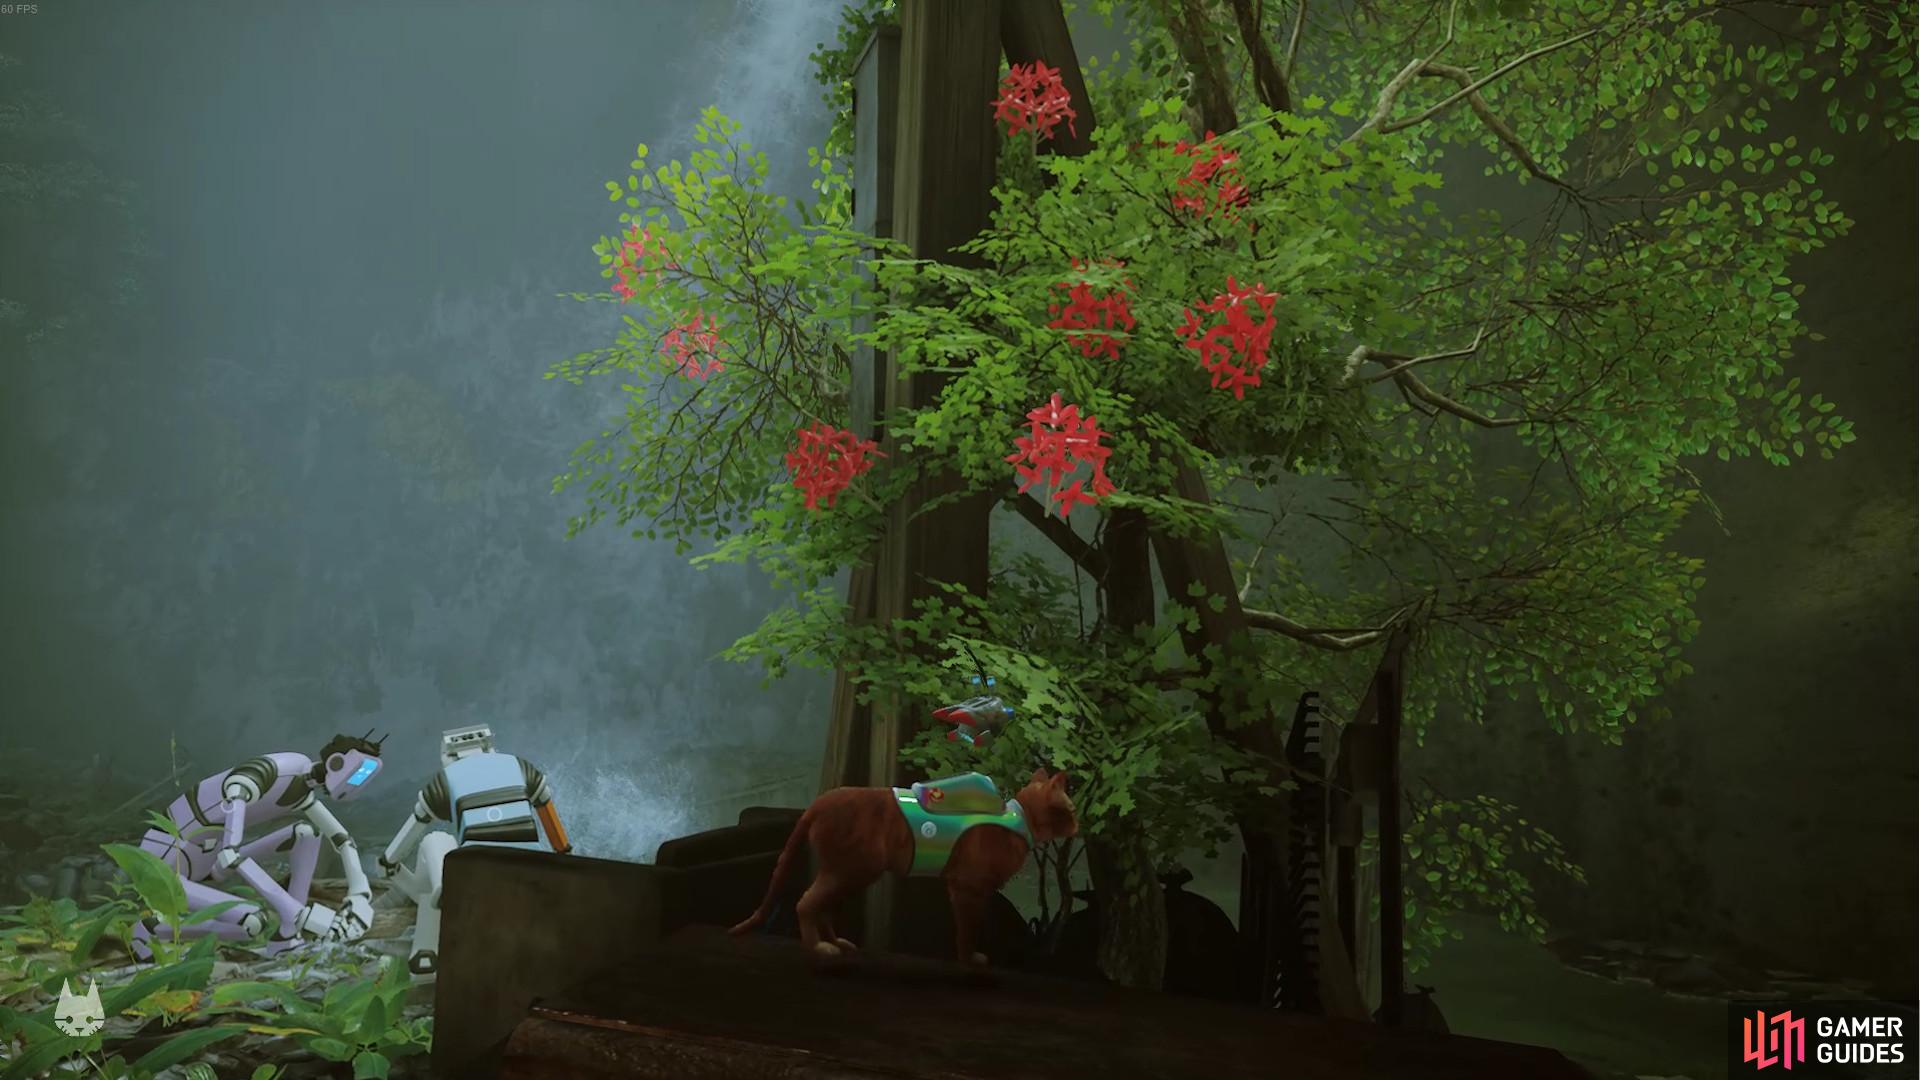 The red flower tree is by the sewage water.